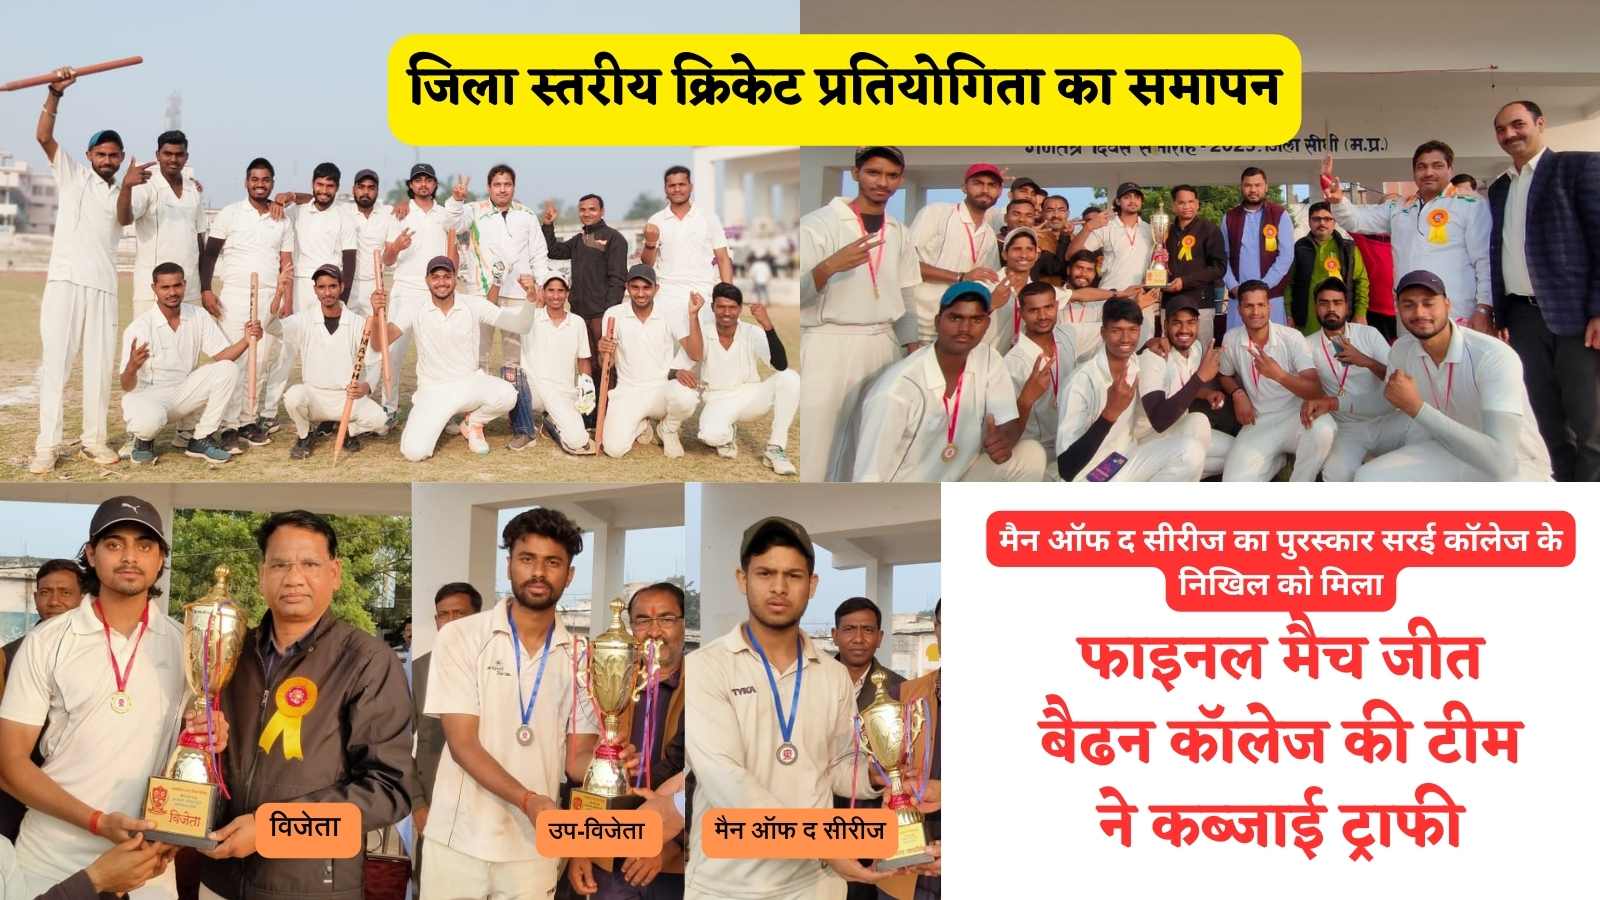 District level cricket competition